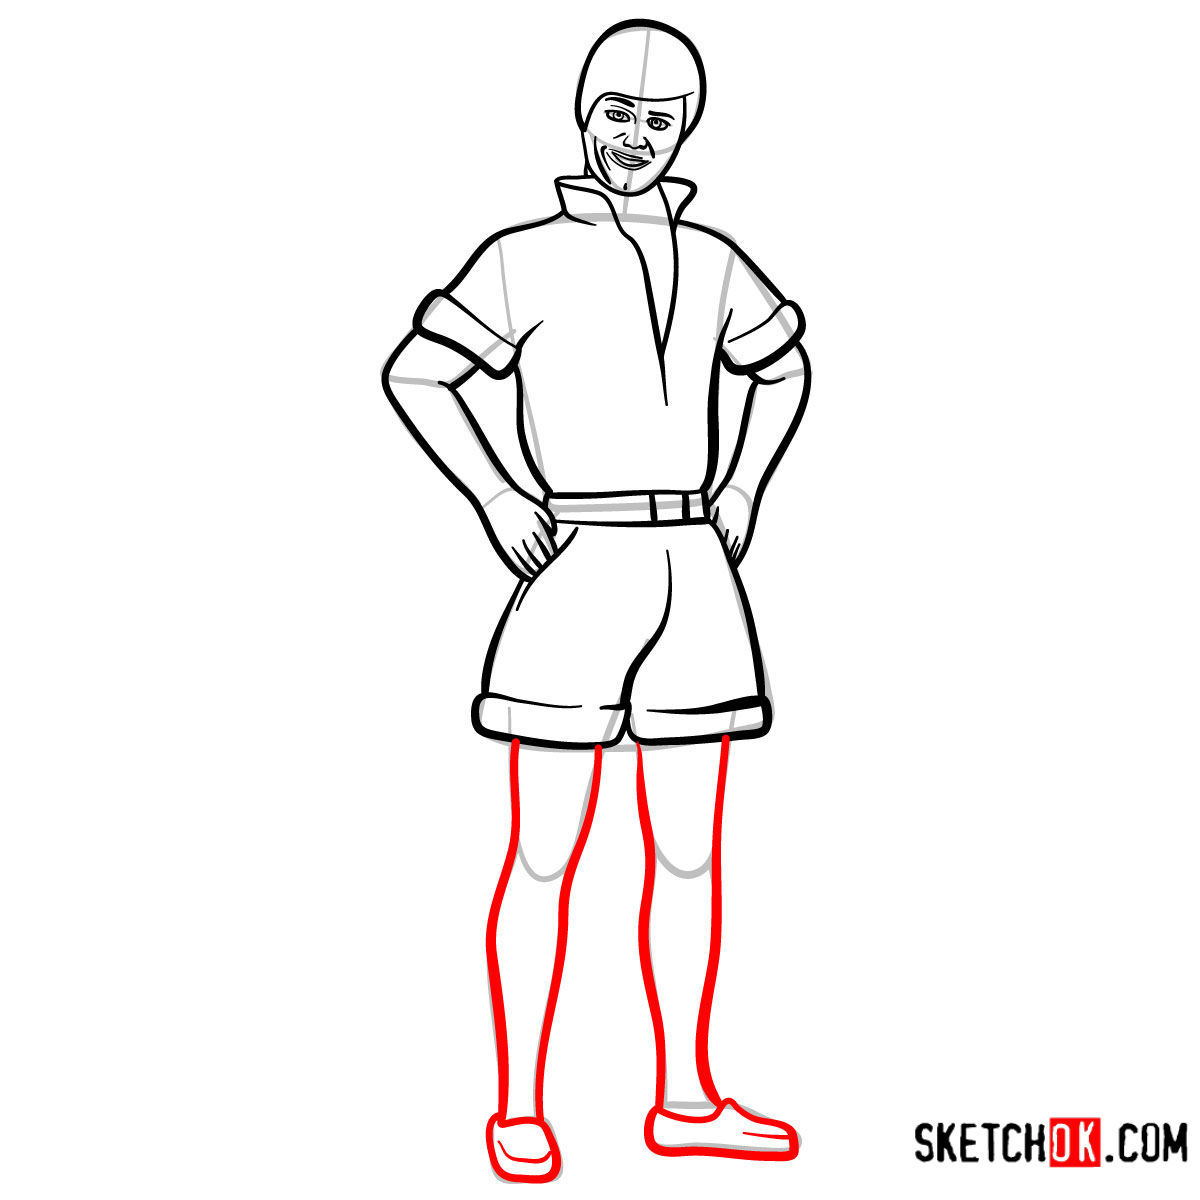 How to draw Ken from Toy Story - step 10